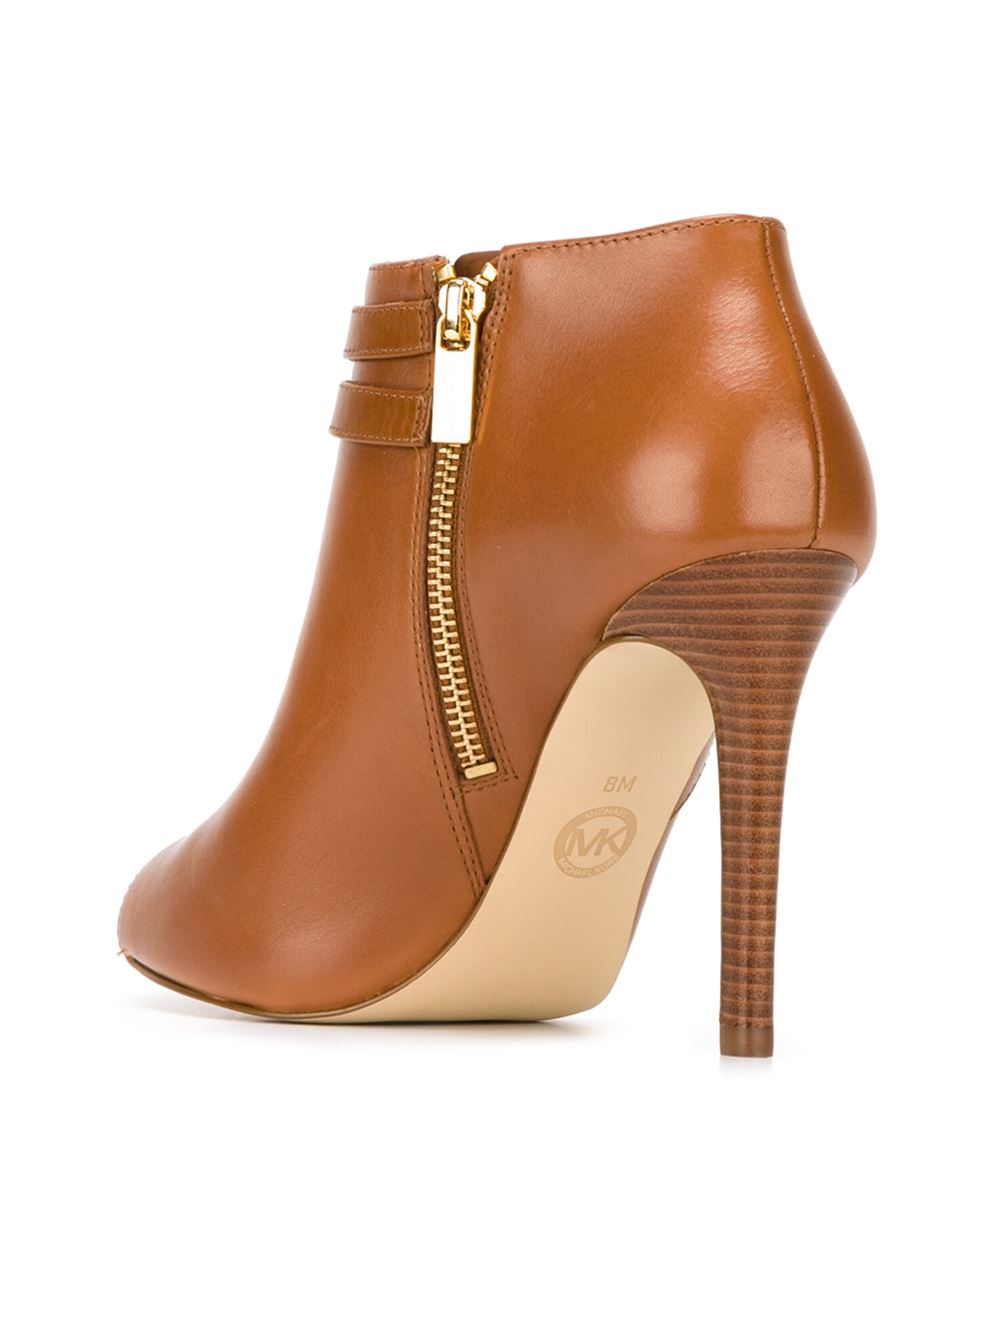 michael kors ankle boots brown